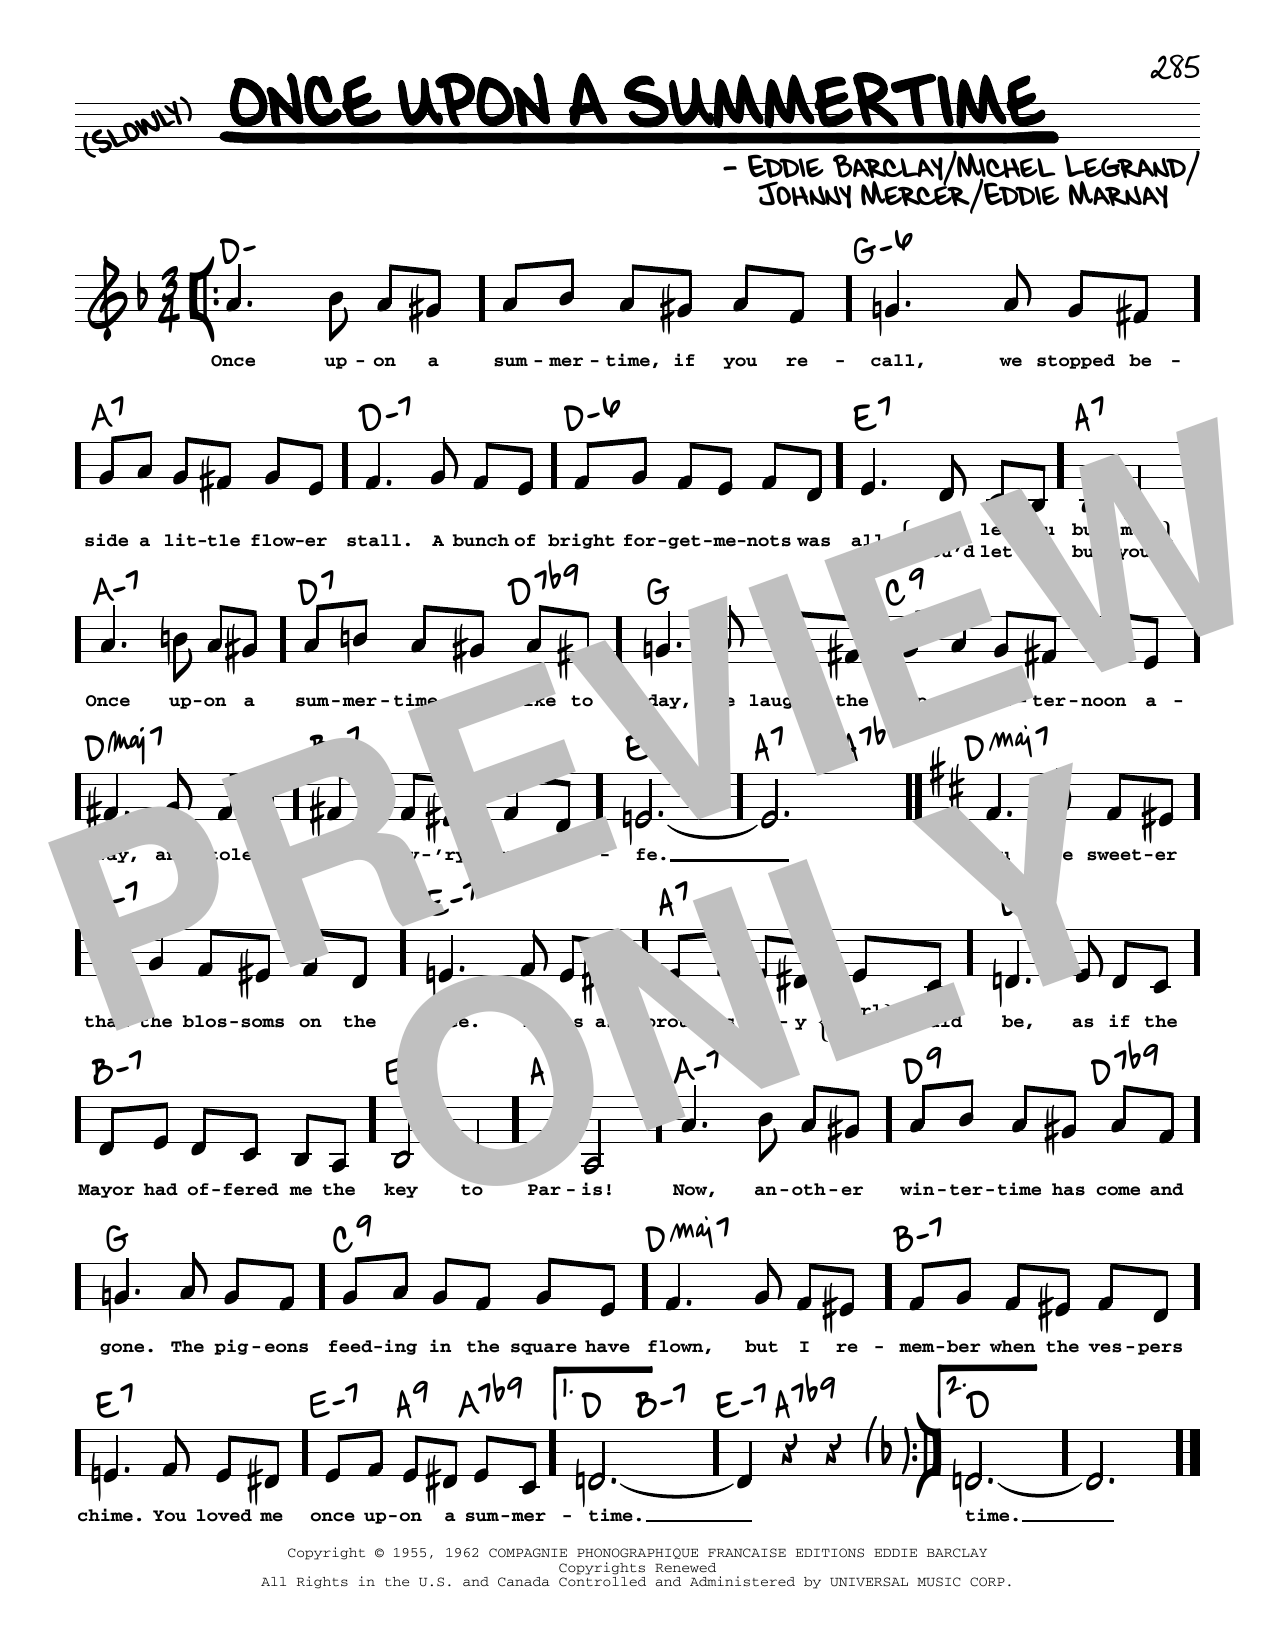 Tony Bennett Once Upon A Summertime (Low Voice) sheet music notes printable PDF score